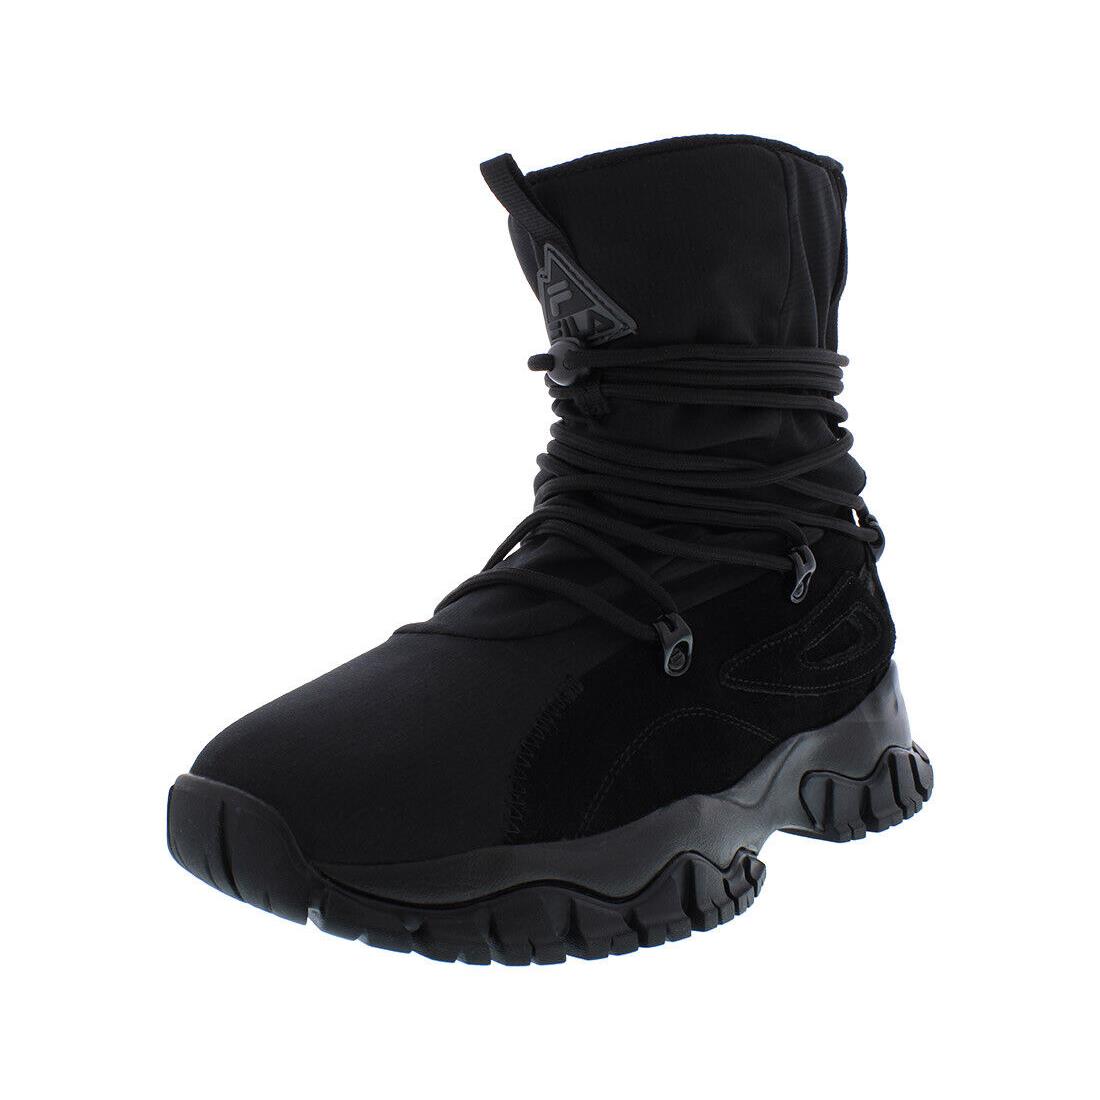 Fila Ray Tracer Sneakerboot Mens Shoes